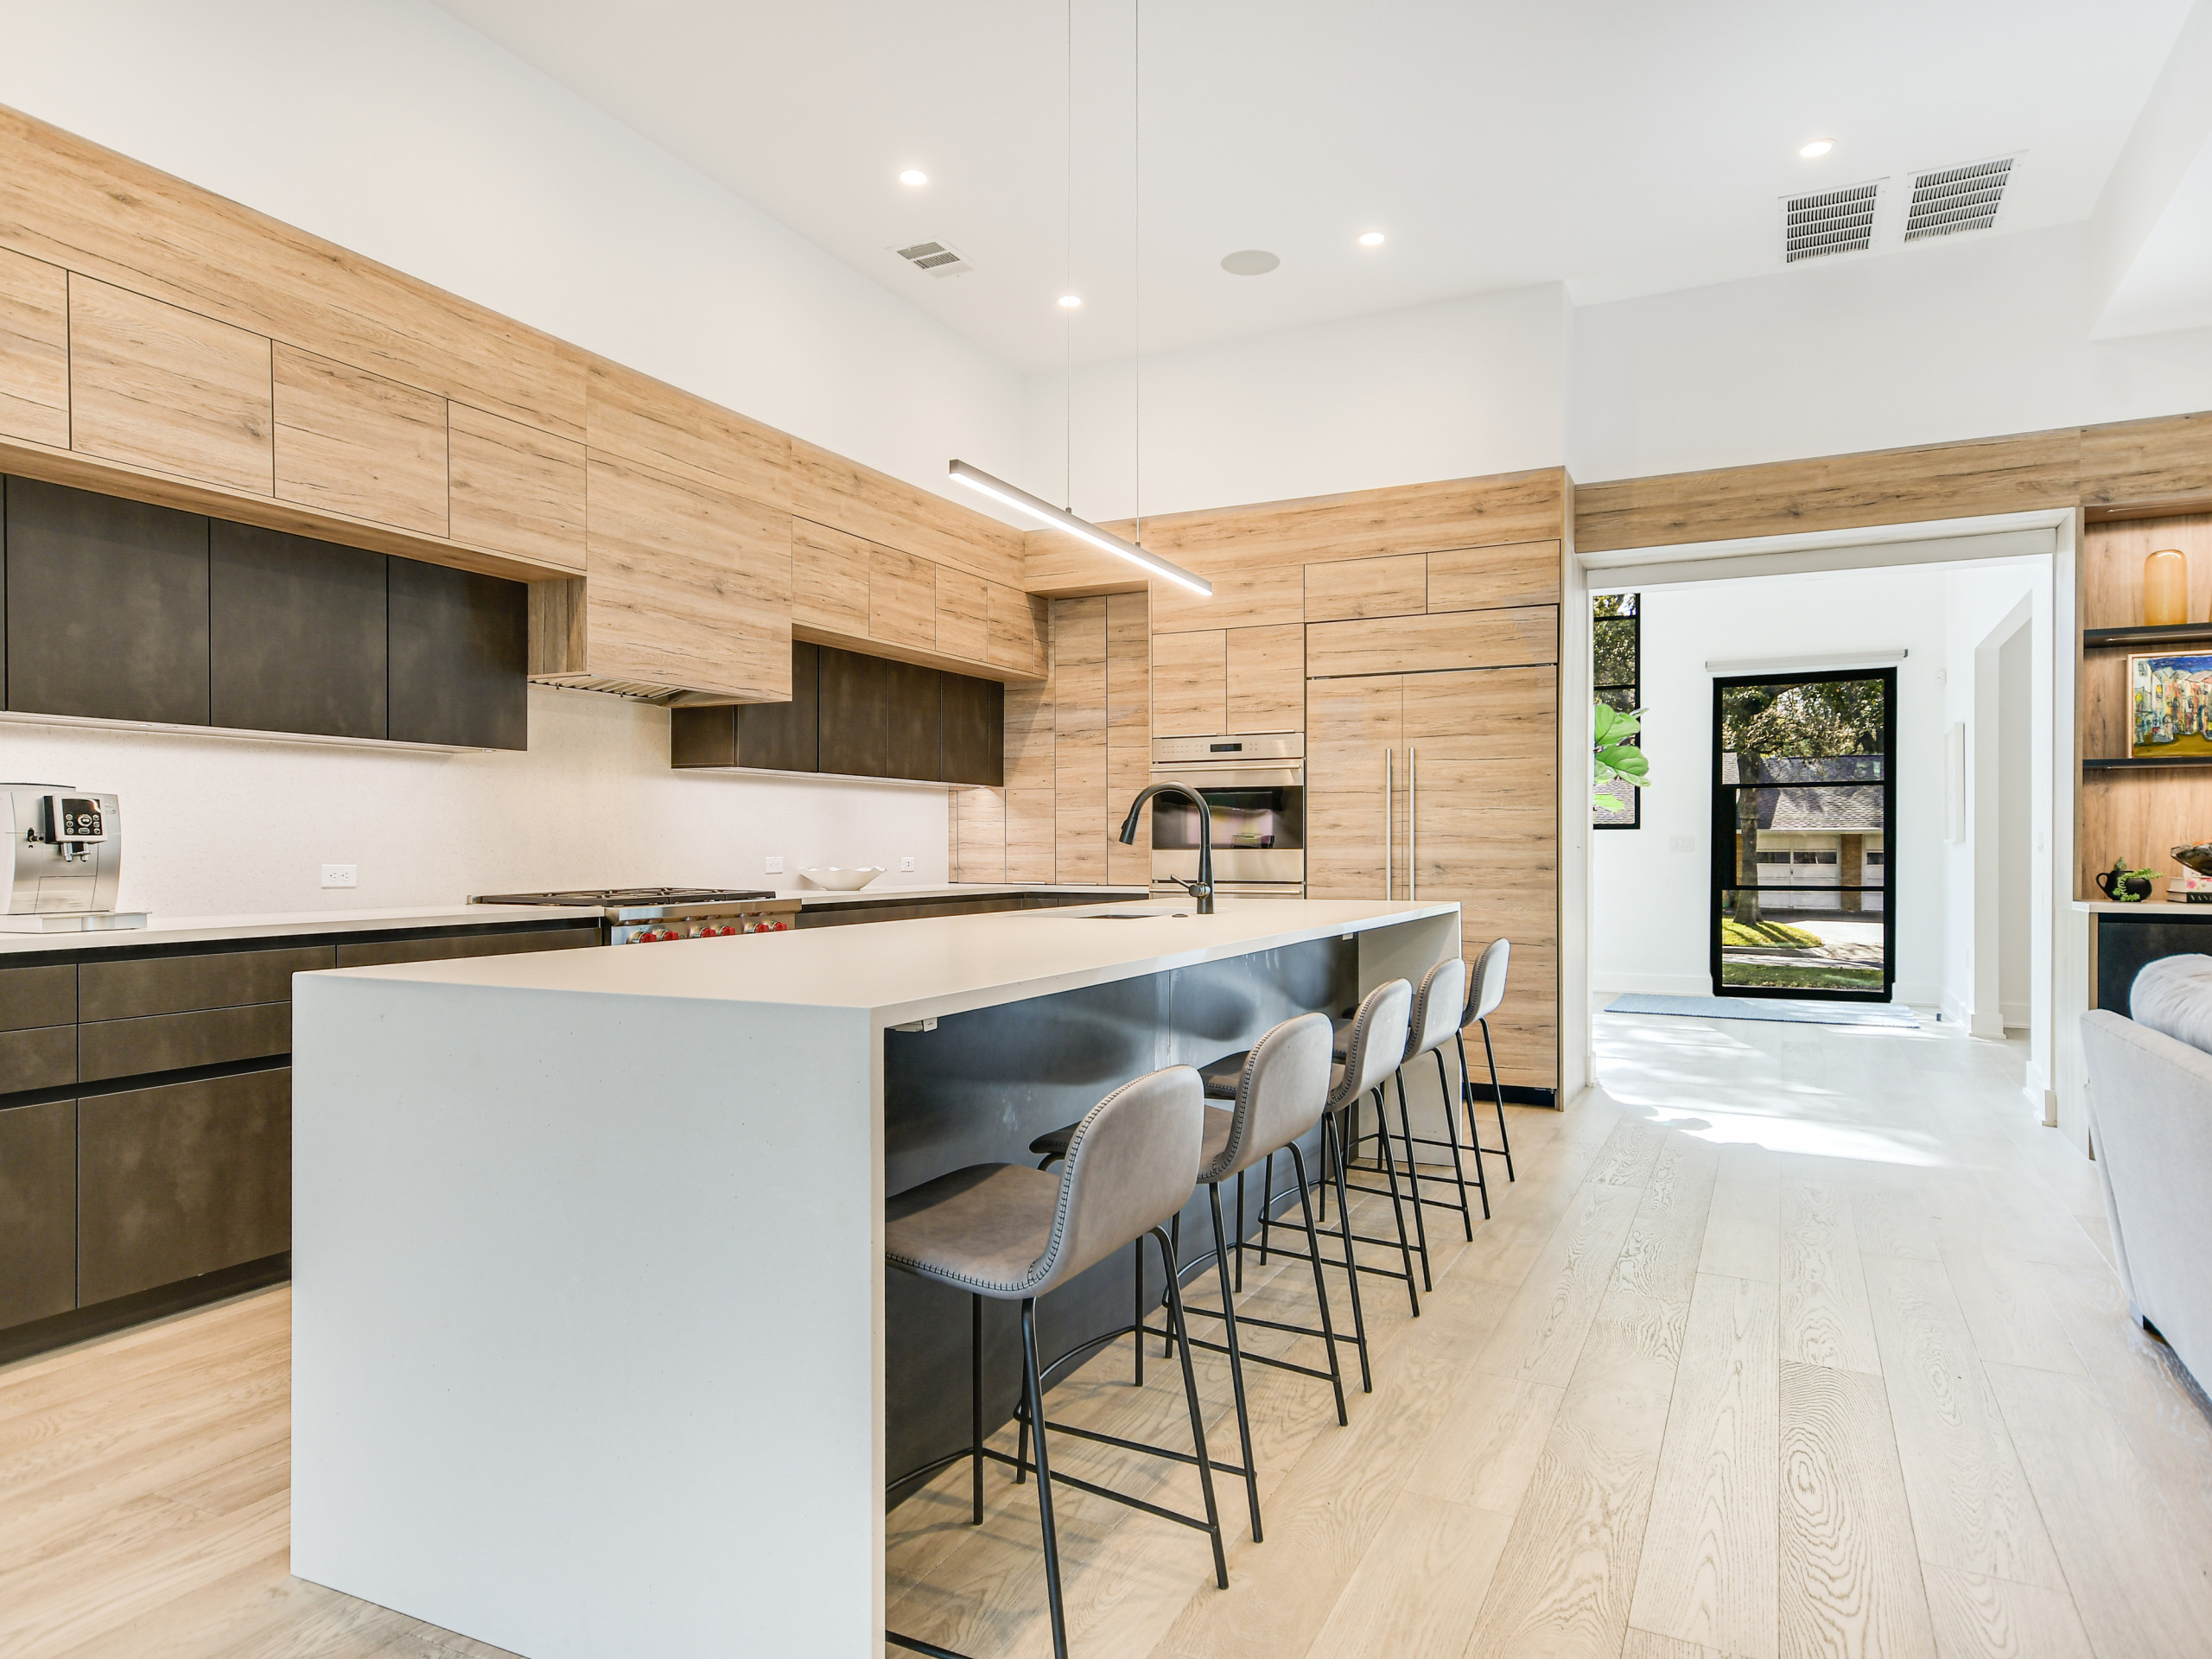 18 Beautiful Flat Panel Kitchen Cabinet Pictures & Ideas   Houzz